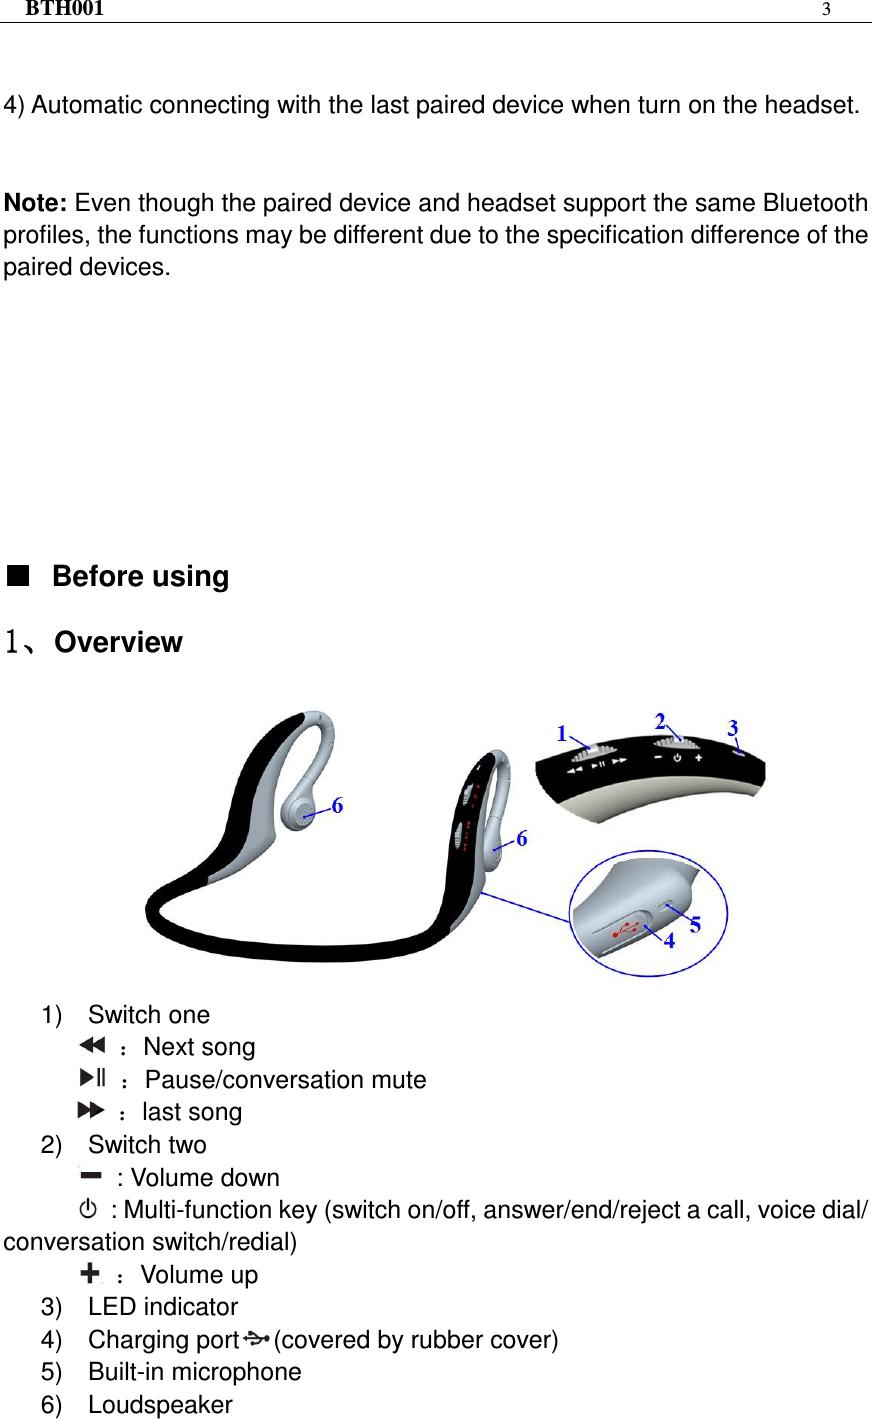 BTH001  3    4) Automatic connecting with the last paired device when turn on the headset.   Note: Even though the paired device and headset support the same Bluetooth profiles, the functions may be different due to the specification difference of the paired devices.         ■■■■    Before using        1111、、、、Overview  1)   Switch one  ：Next song  ：Pause/conversation mute  ：last song 2)    Switch two         : Volume down   : Multi-function key (switch on/off, answer/end/reject a call, voice dial/ conversation switch/redial)         ：Volume up 3)    LED indicator       4)    Charging port (covered by rubber cover)       5)    Built-in microphone       6)    Loudspeaker 